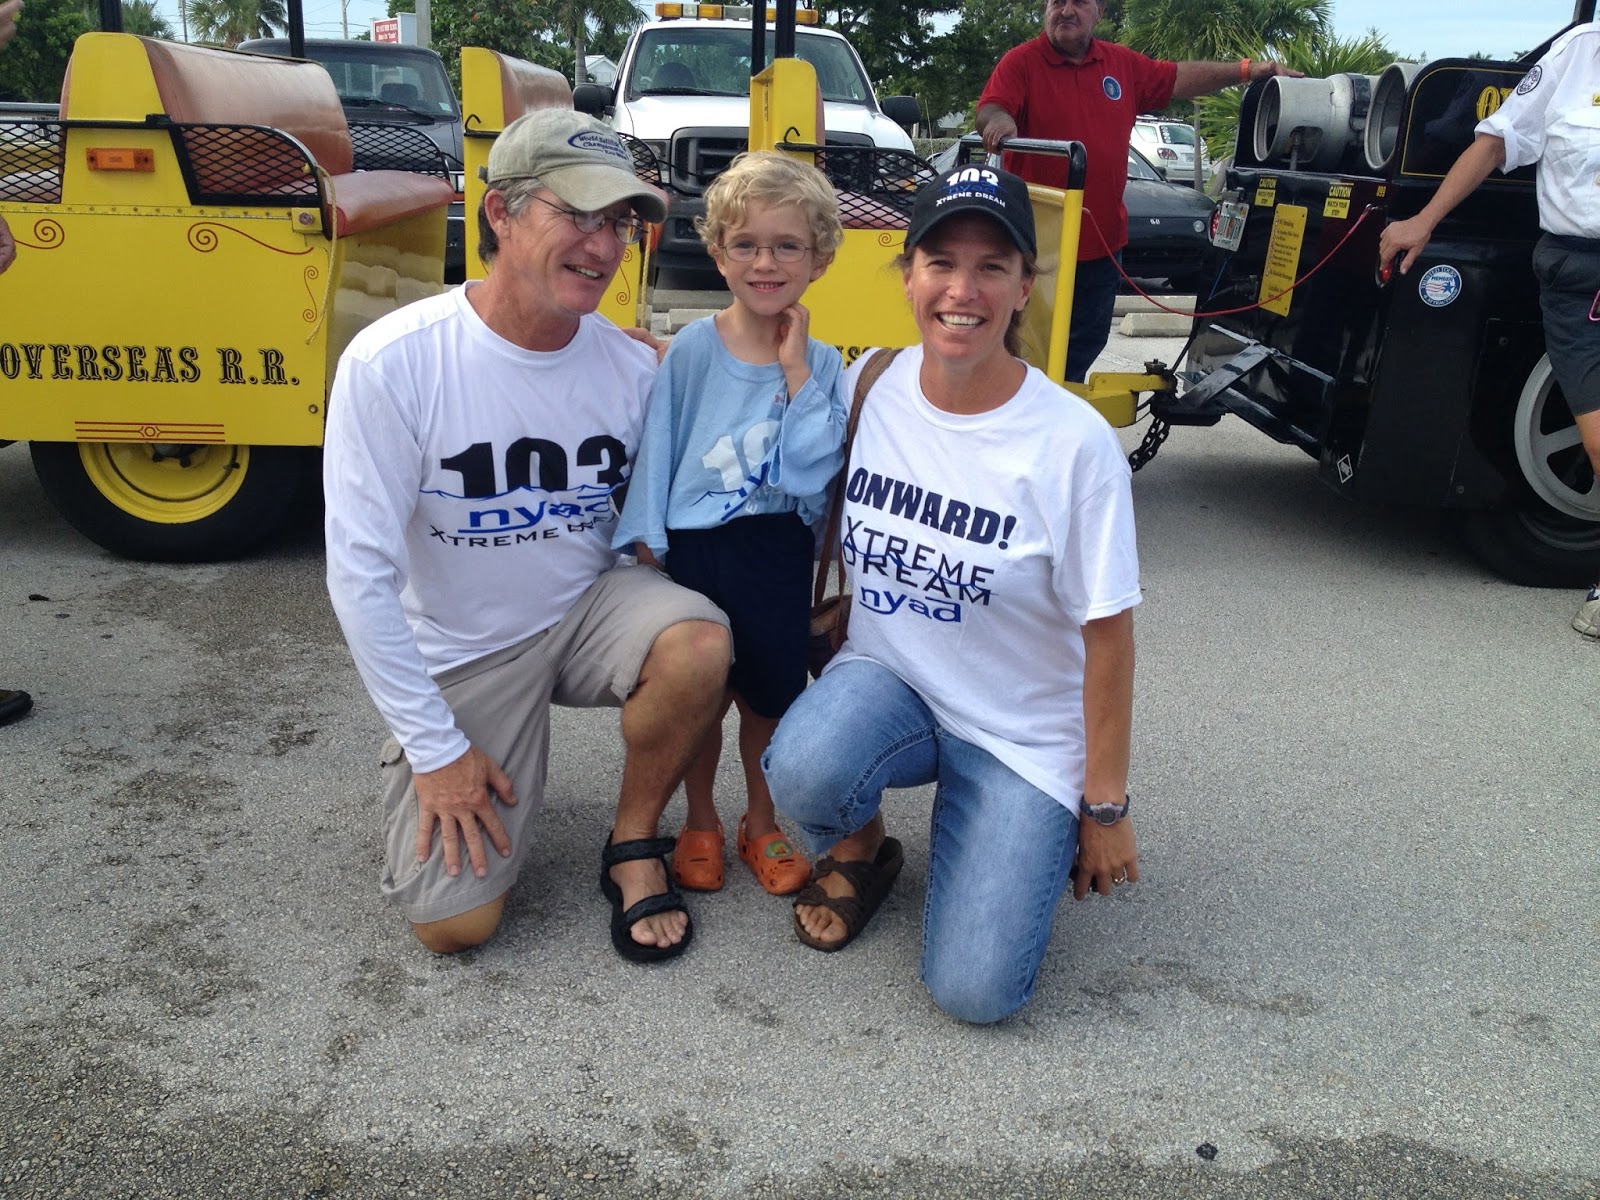 Team members and supporters gather at Key West High School before the Conch Tour Train parade. photo credit: JoAnn Murray